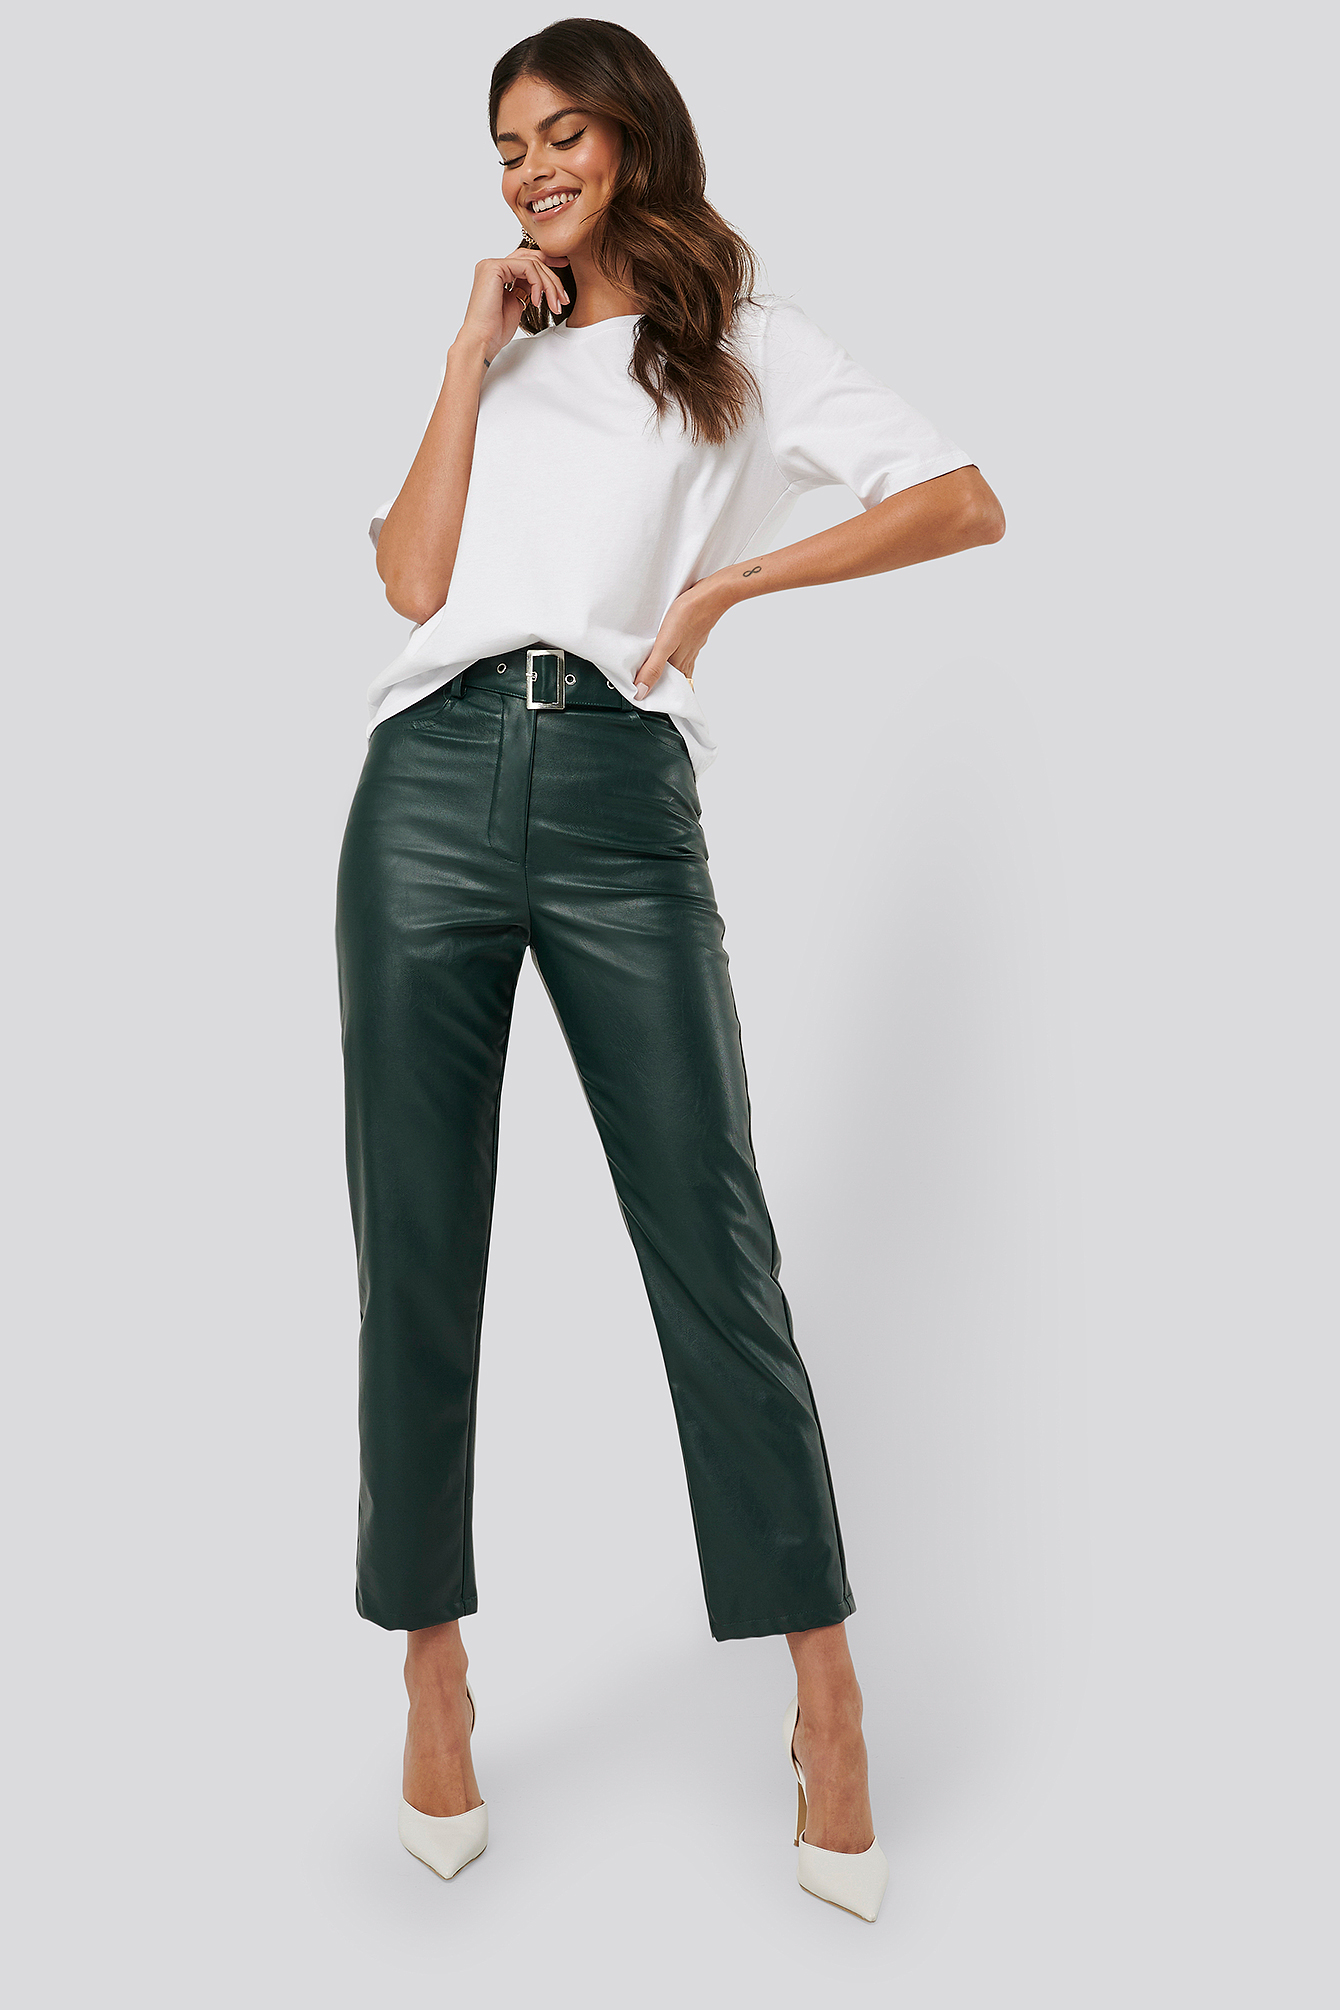 leather green pants